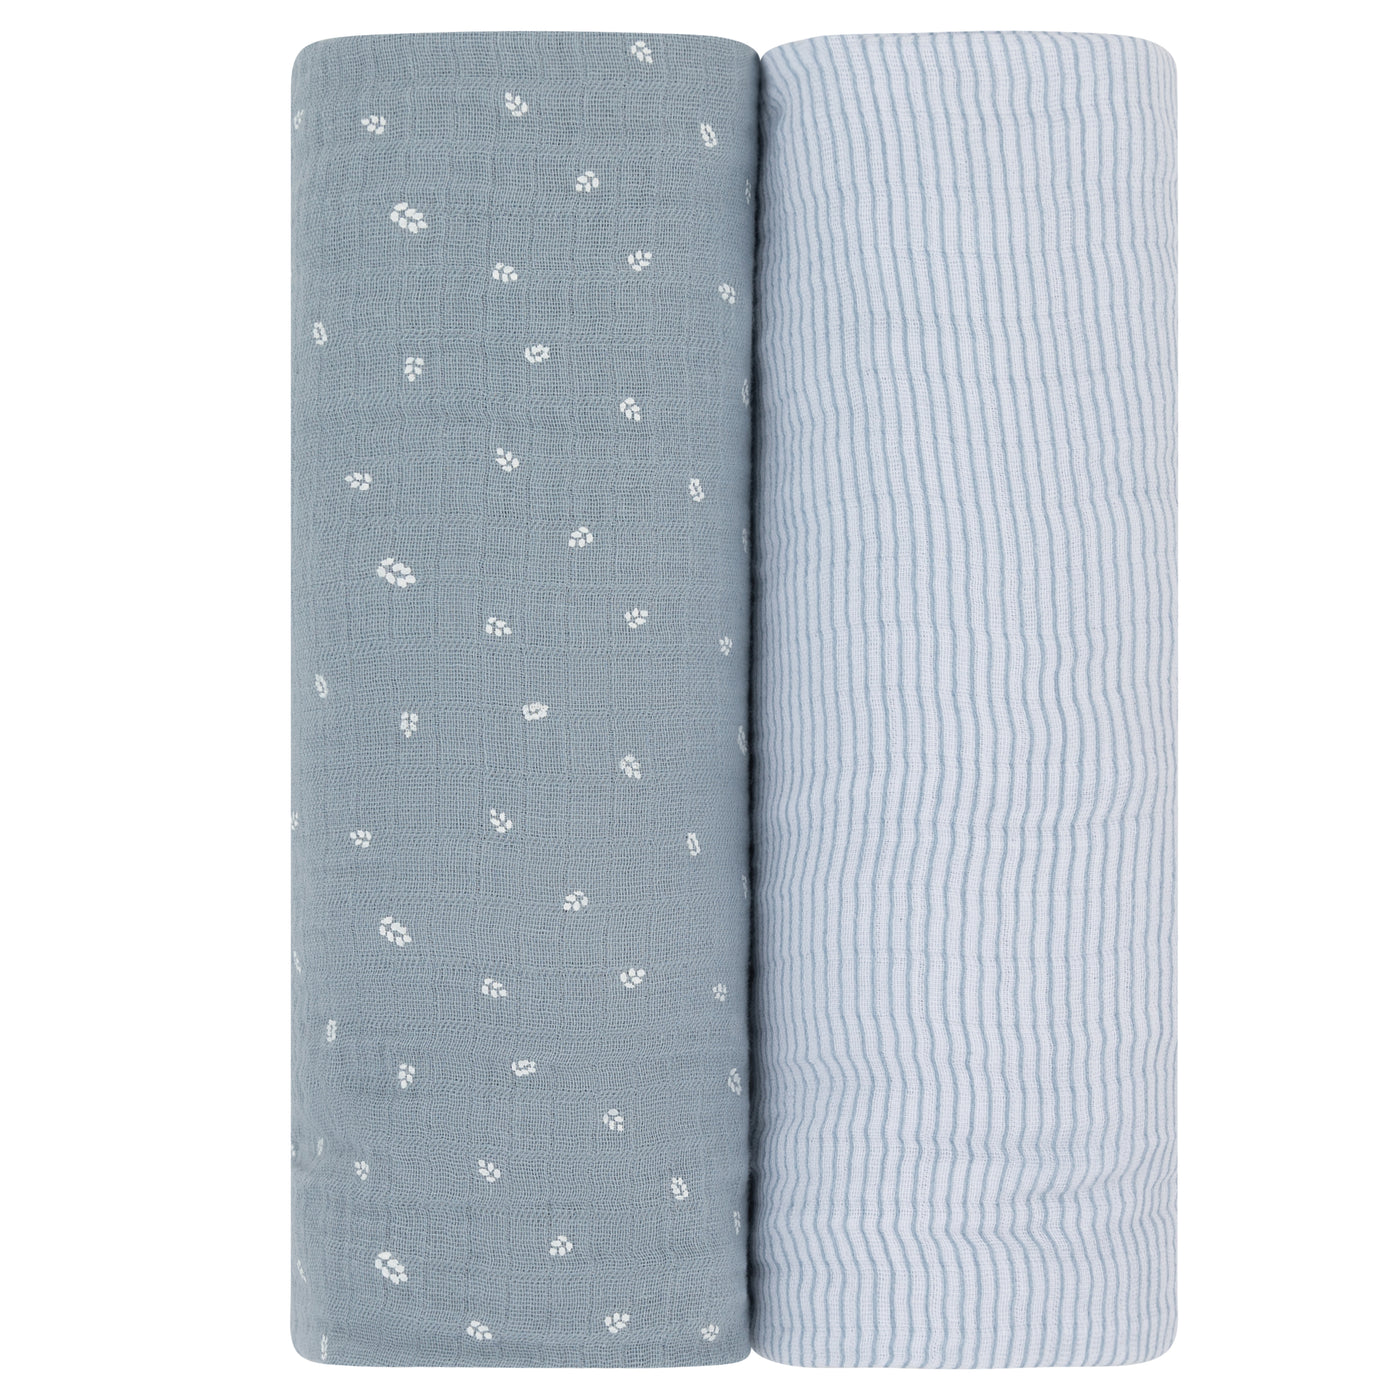 Ely's & Co. Muslin Swaddle Two Pack - Blue Leaf /Stripes Collection